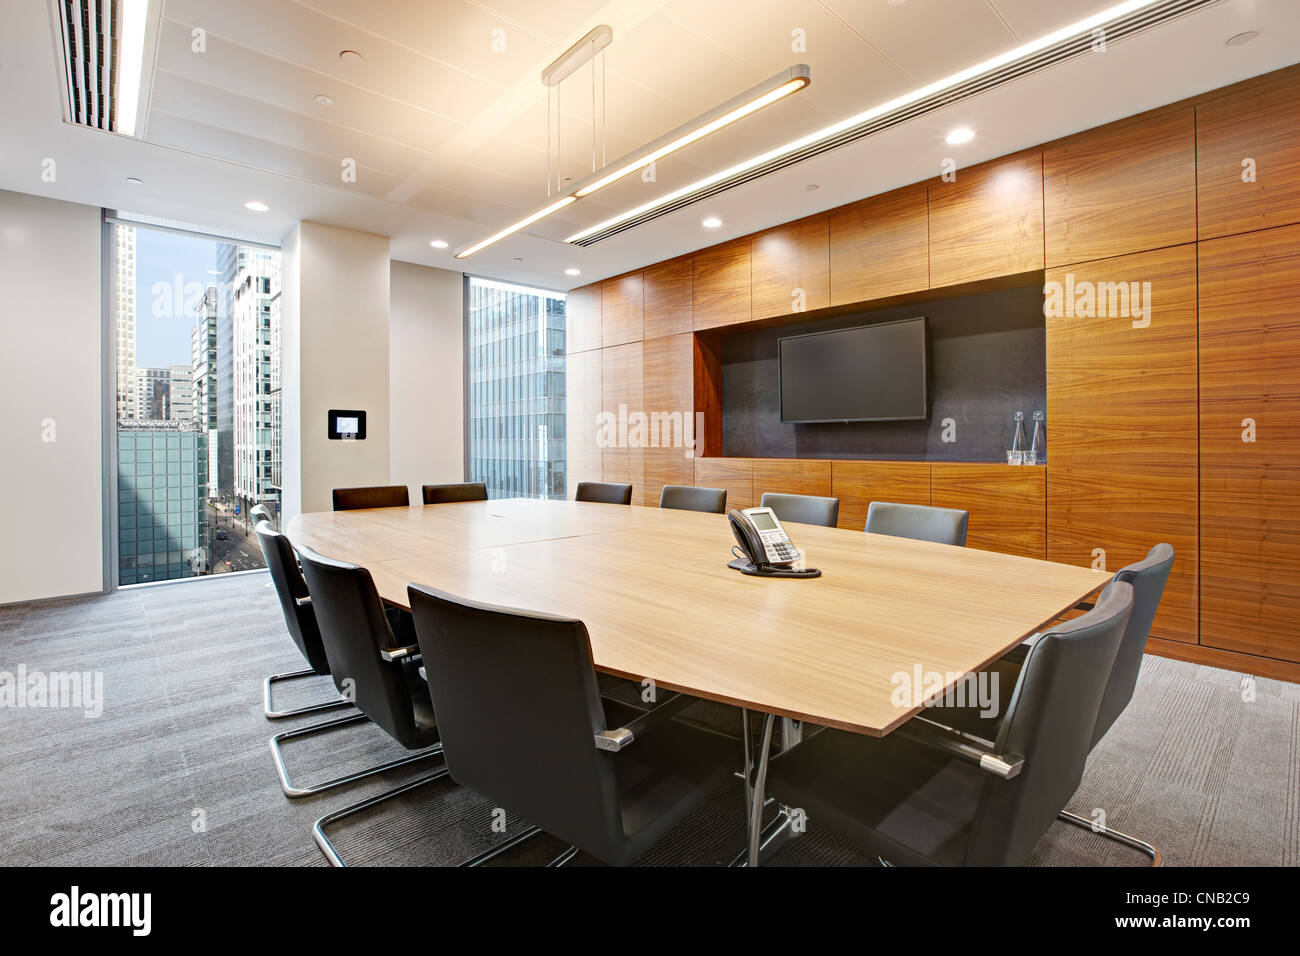 board room meeting room large table screen chairs Stock Photo